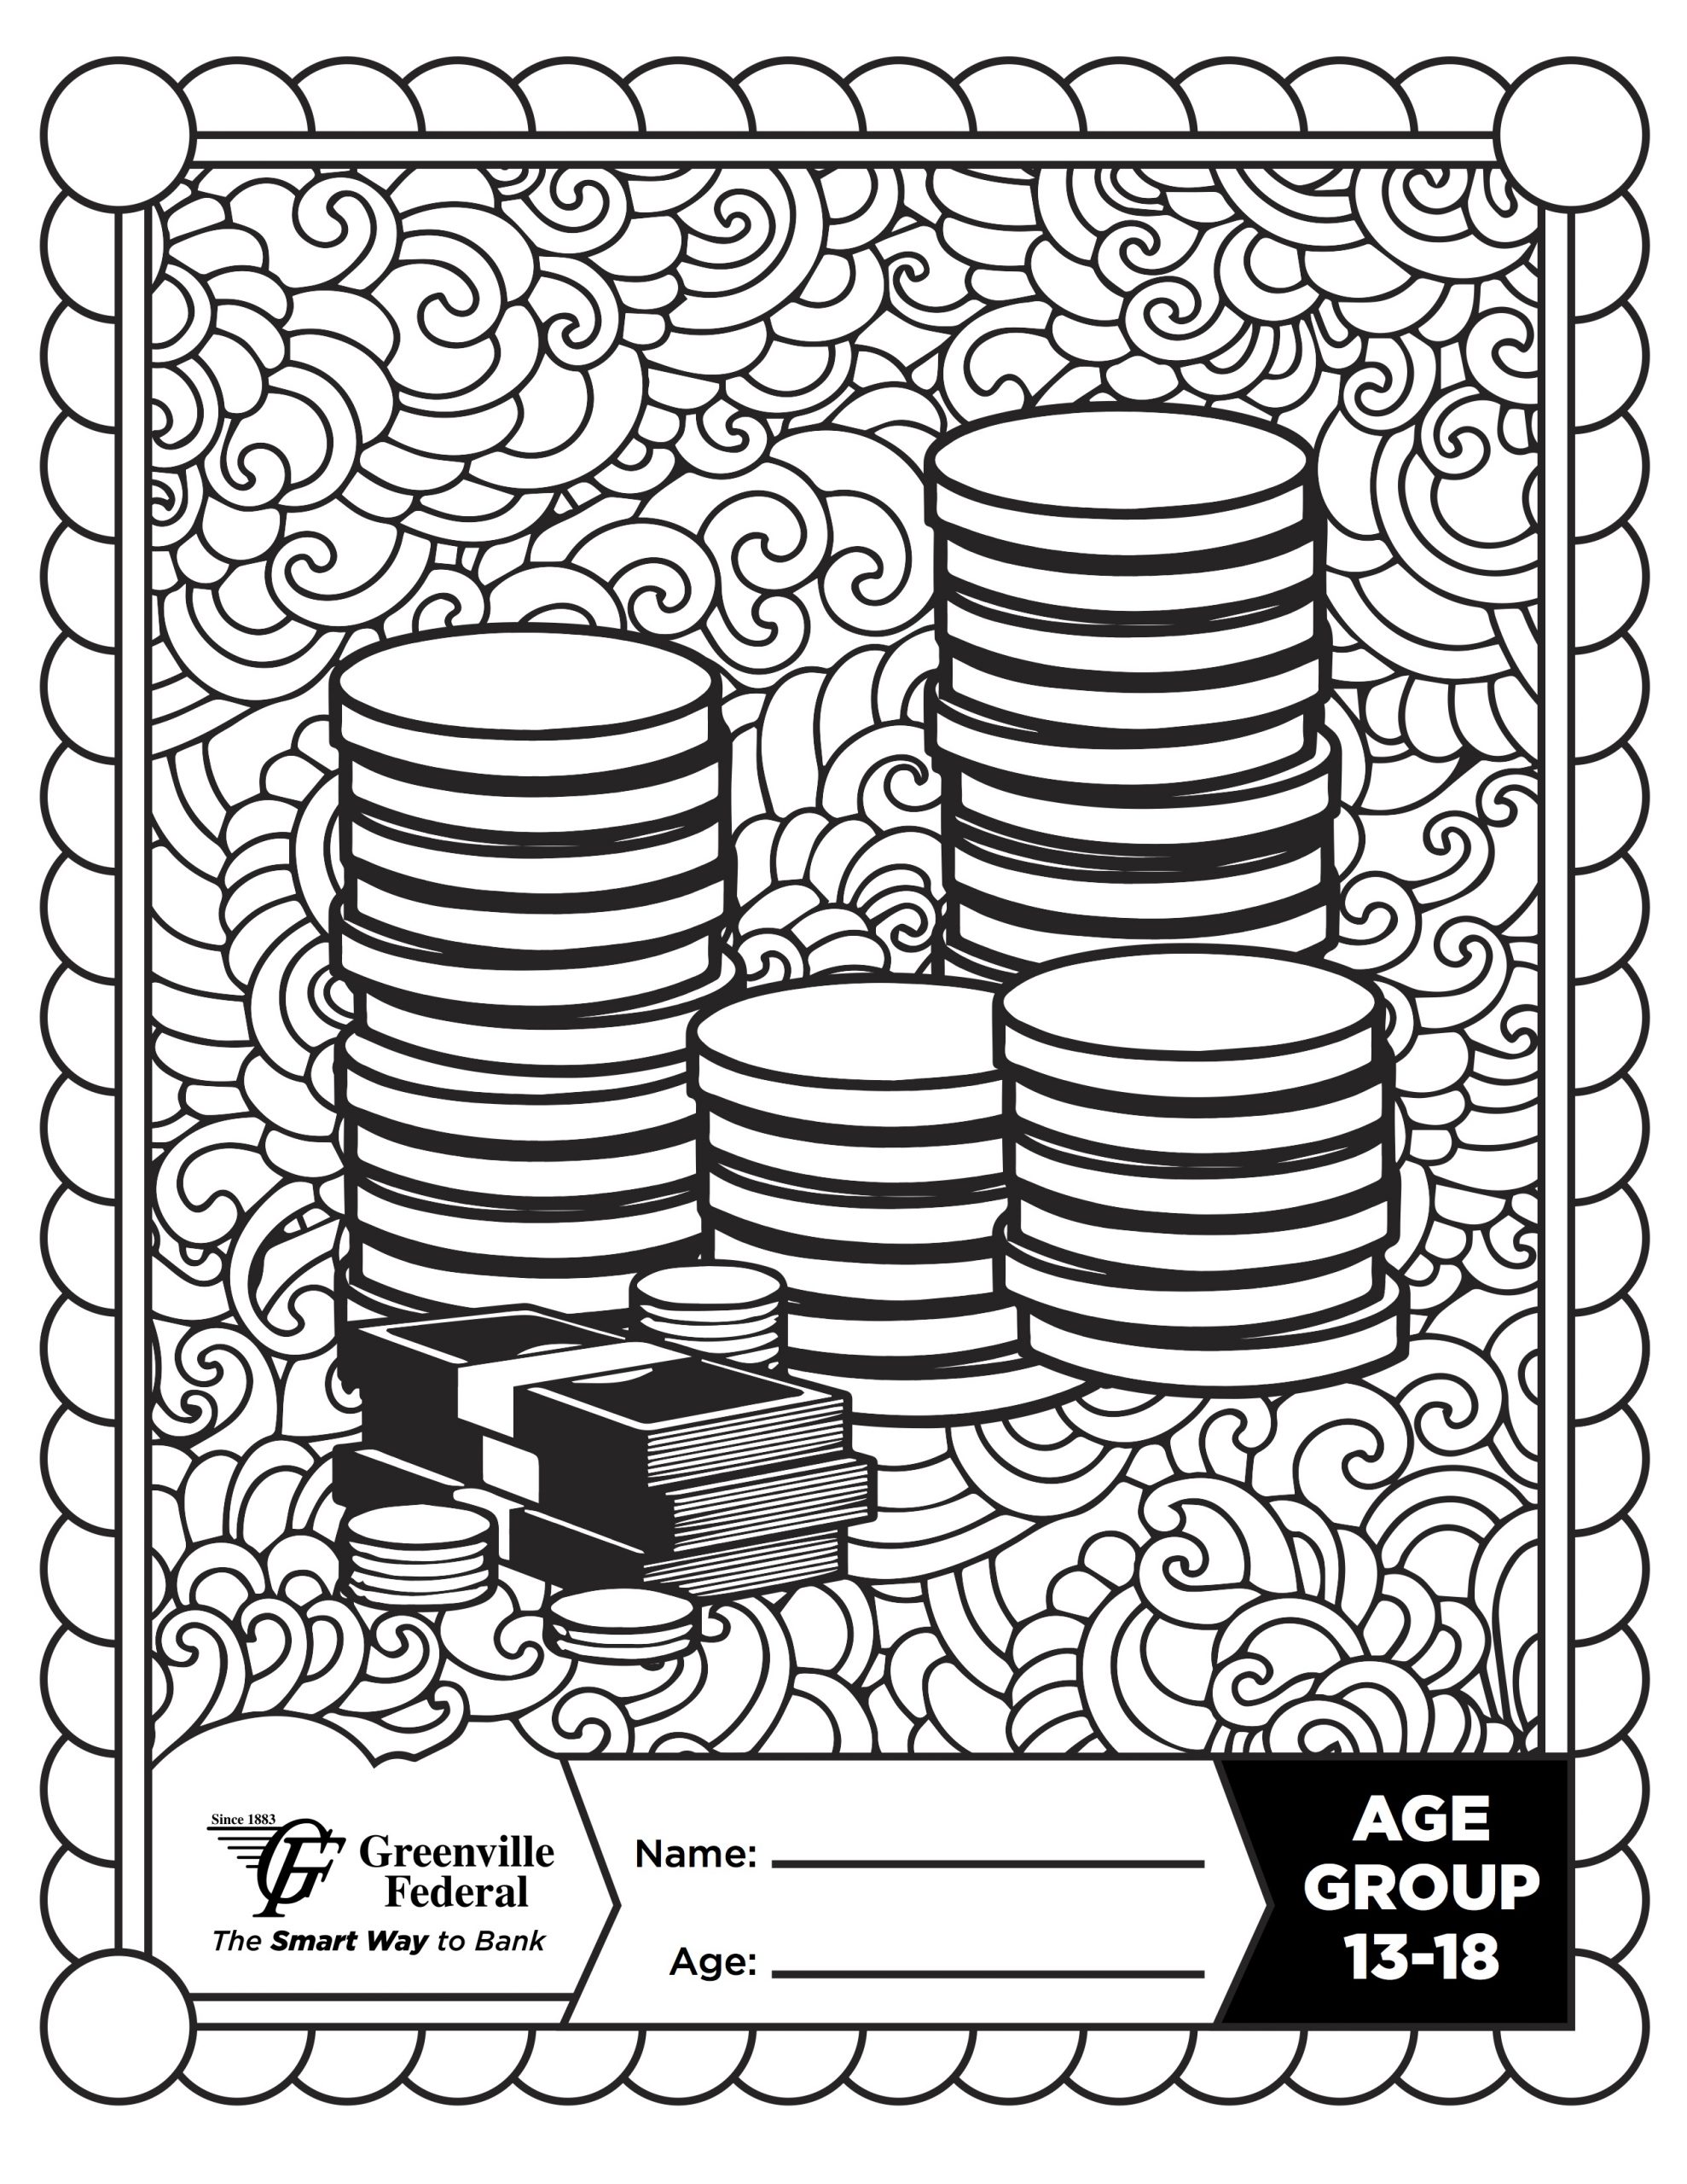 Coloring Pages | Greenville Federal